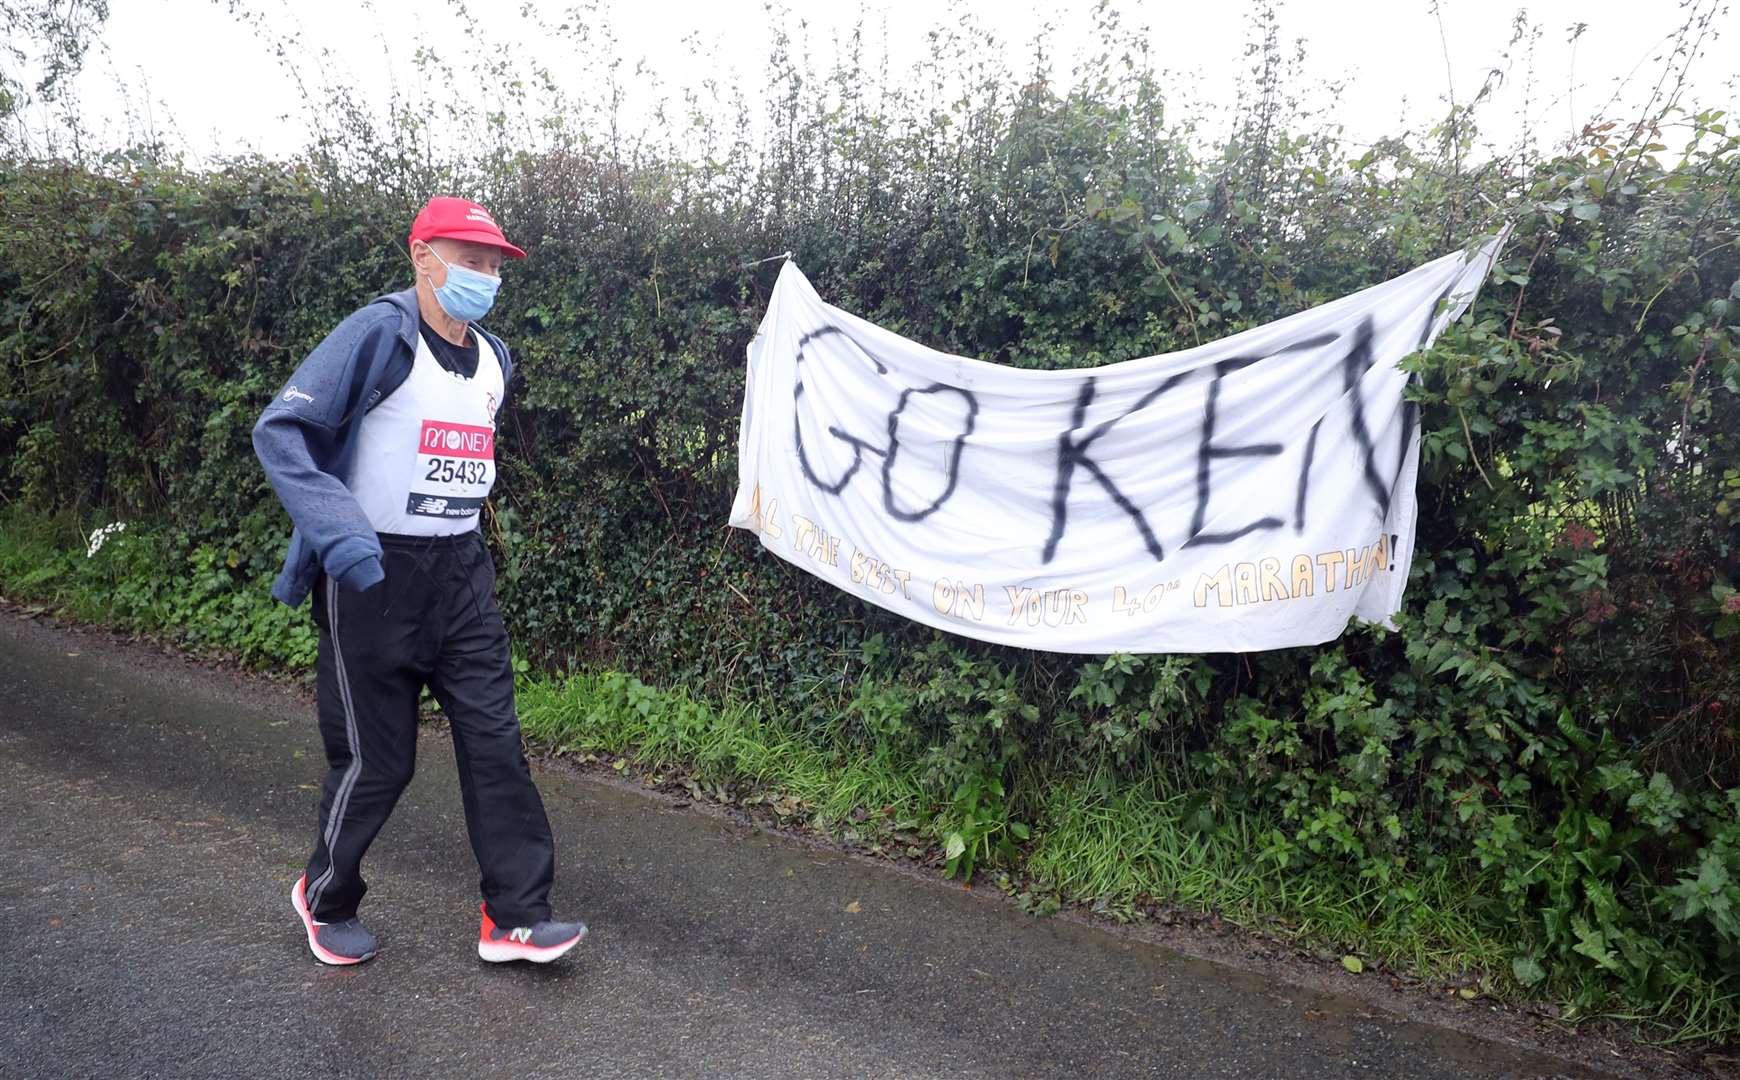 ‘Ever Present’ Ken Jones, 87, takes part in the virtual London Marathon in his home town of Strabane, west Tyrone (Niall Carson/PA)